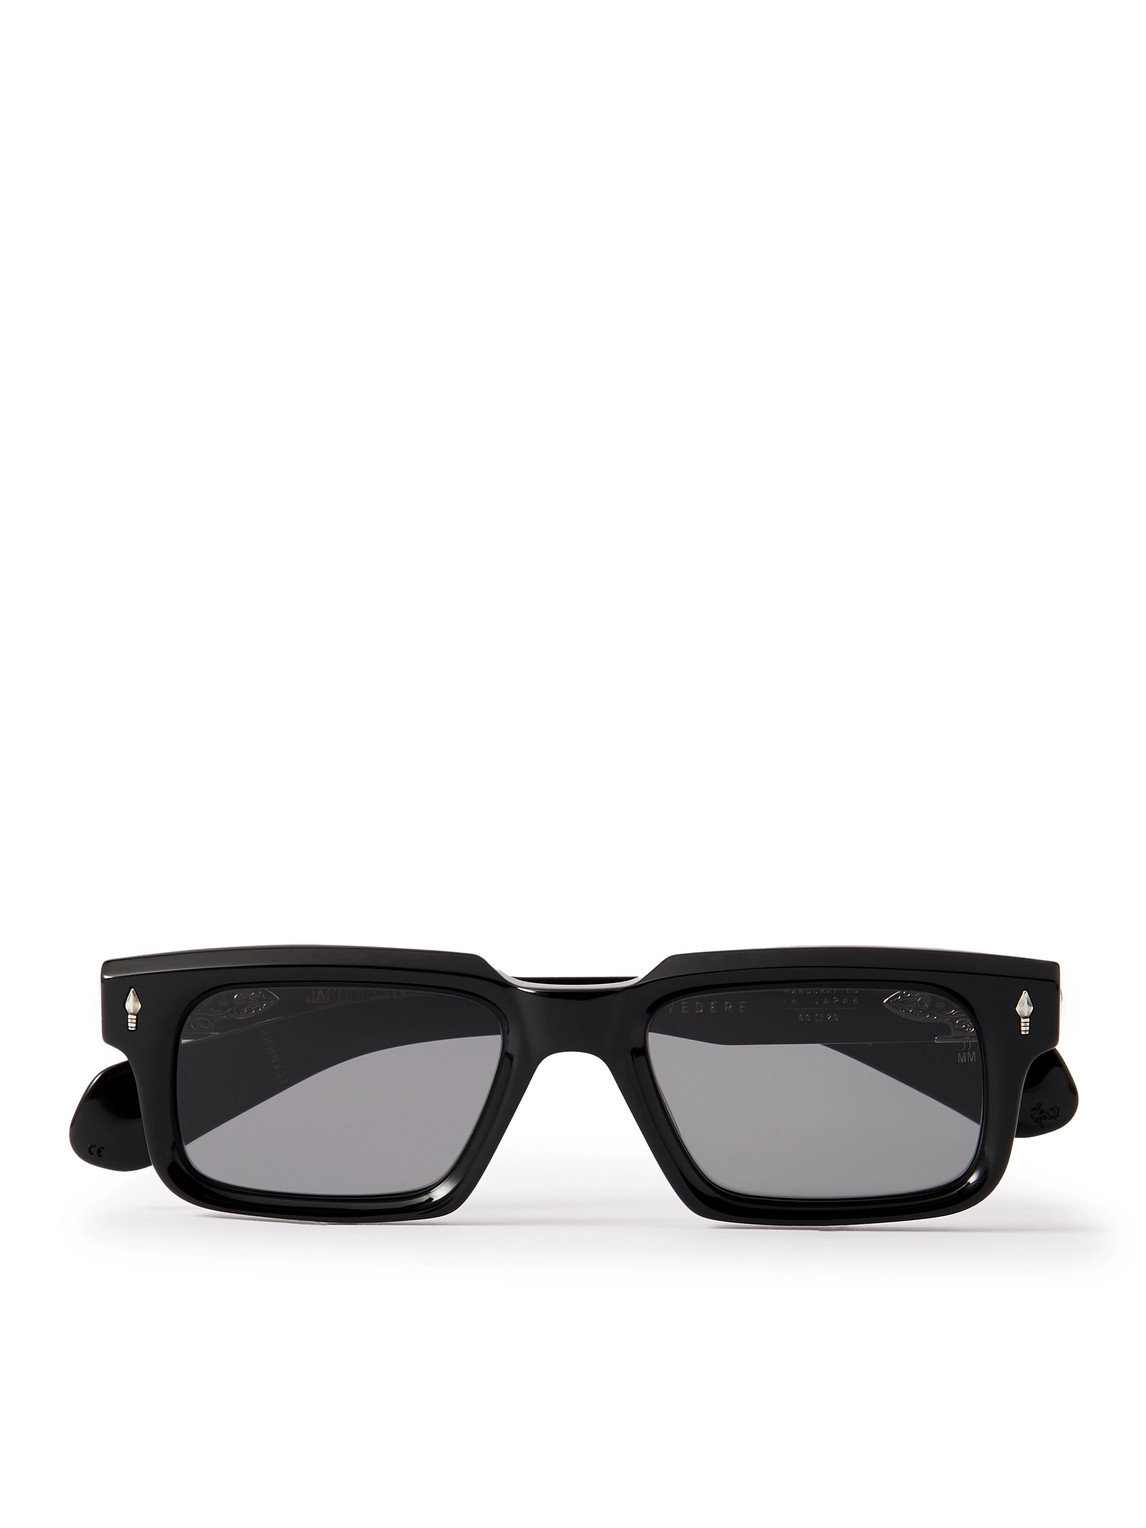 Jacques Marie Mage Belvedere Square-frame Acetate And Gold- And Silver-tone Sunglasses In Black